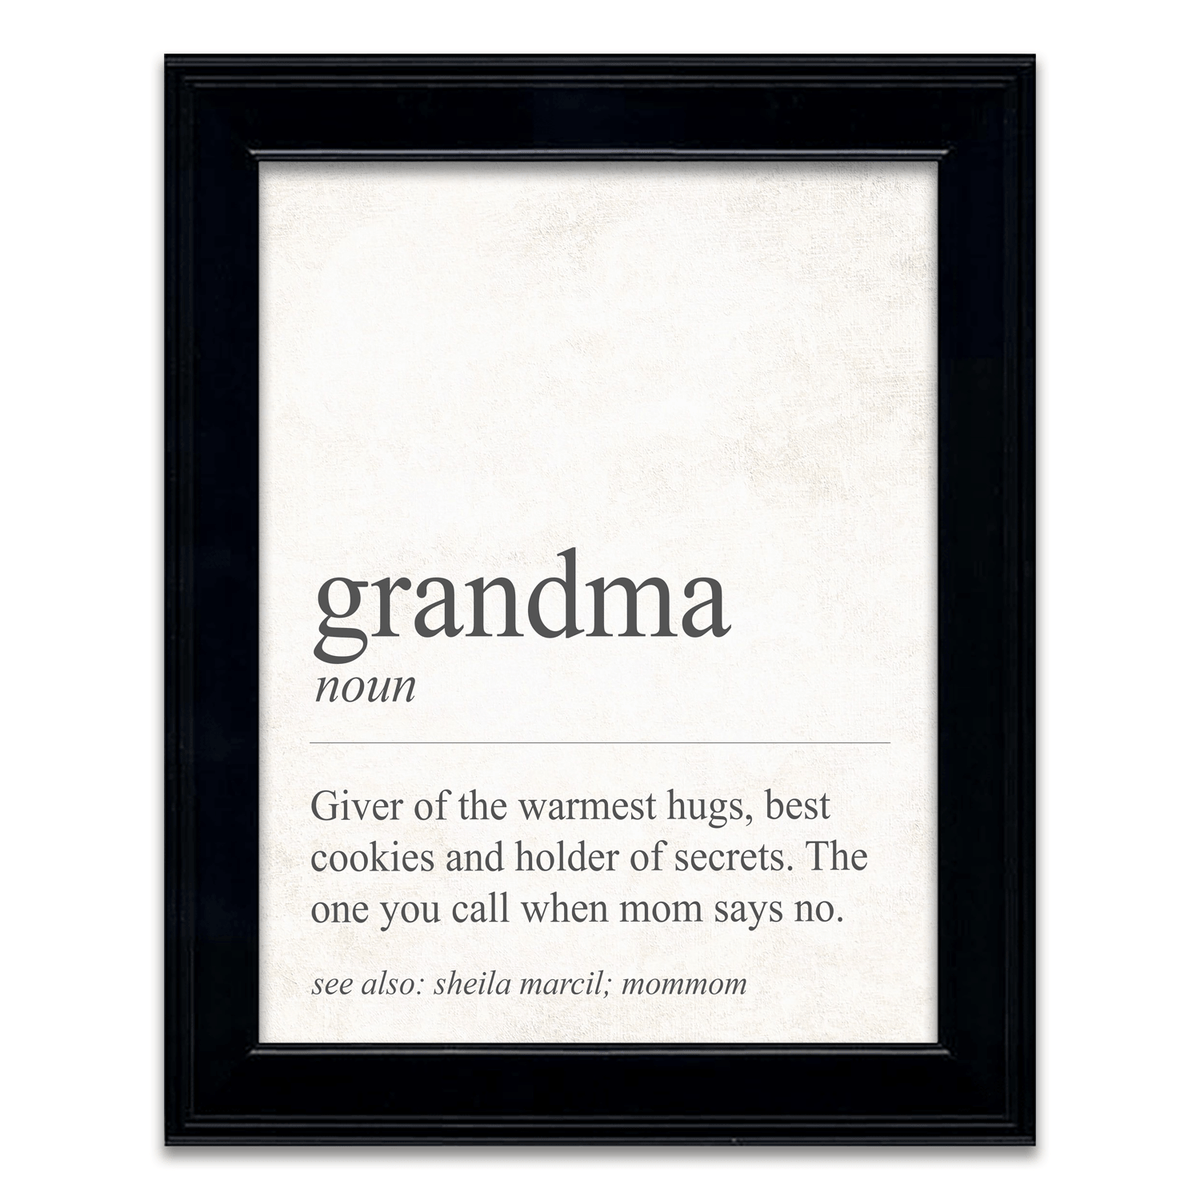 Personalized Grandma Gift Idea from Personal Prints framed art